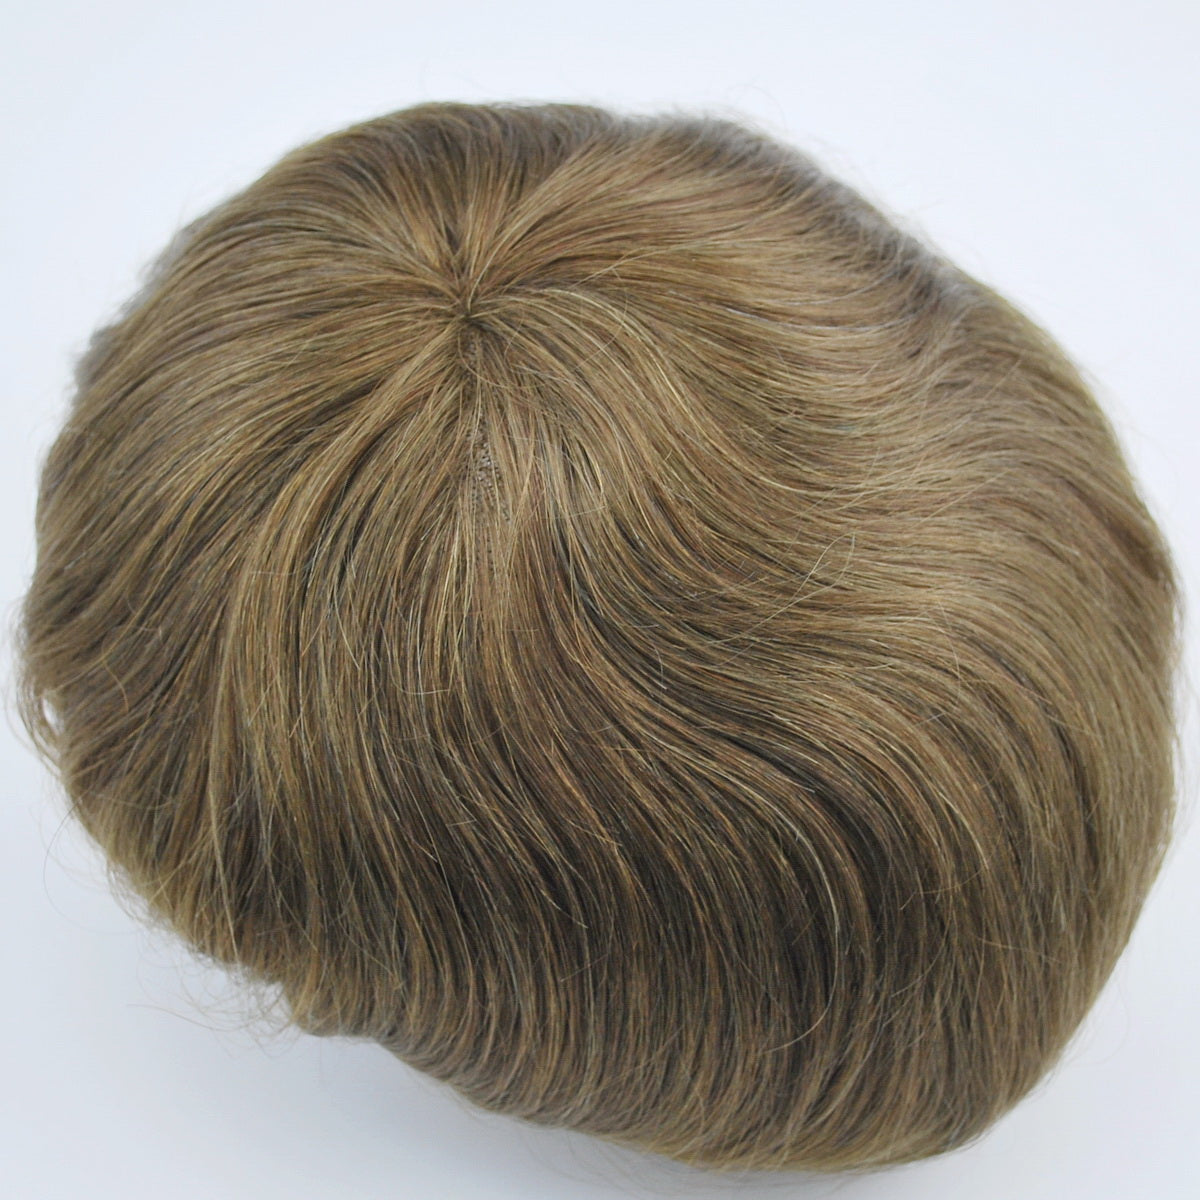 #6 Light brown lace front hair piece human hair toupee French lace with PU back and sides